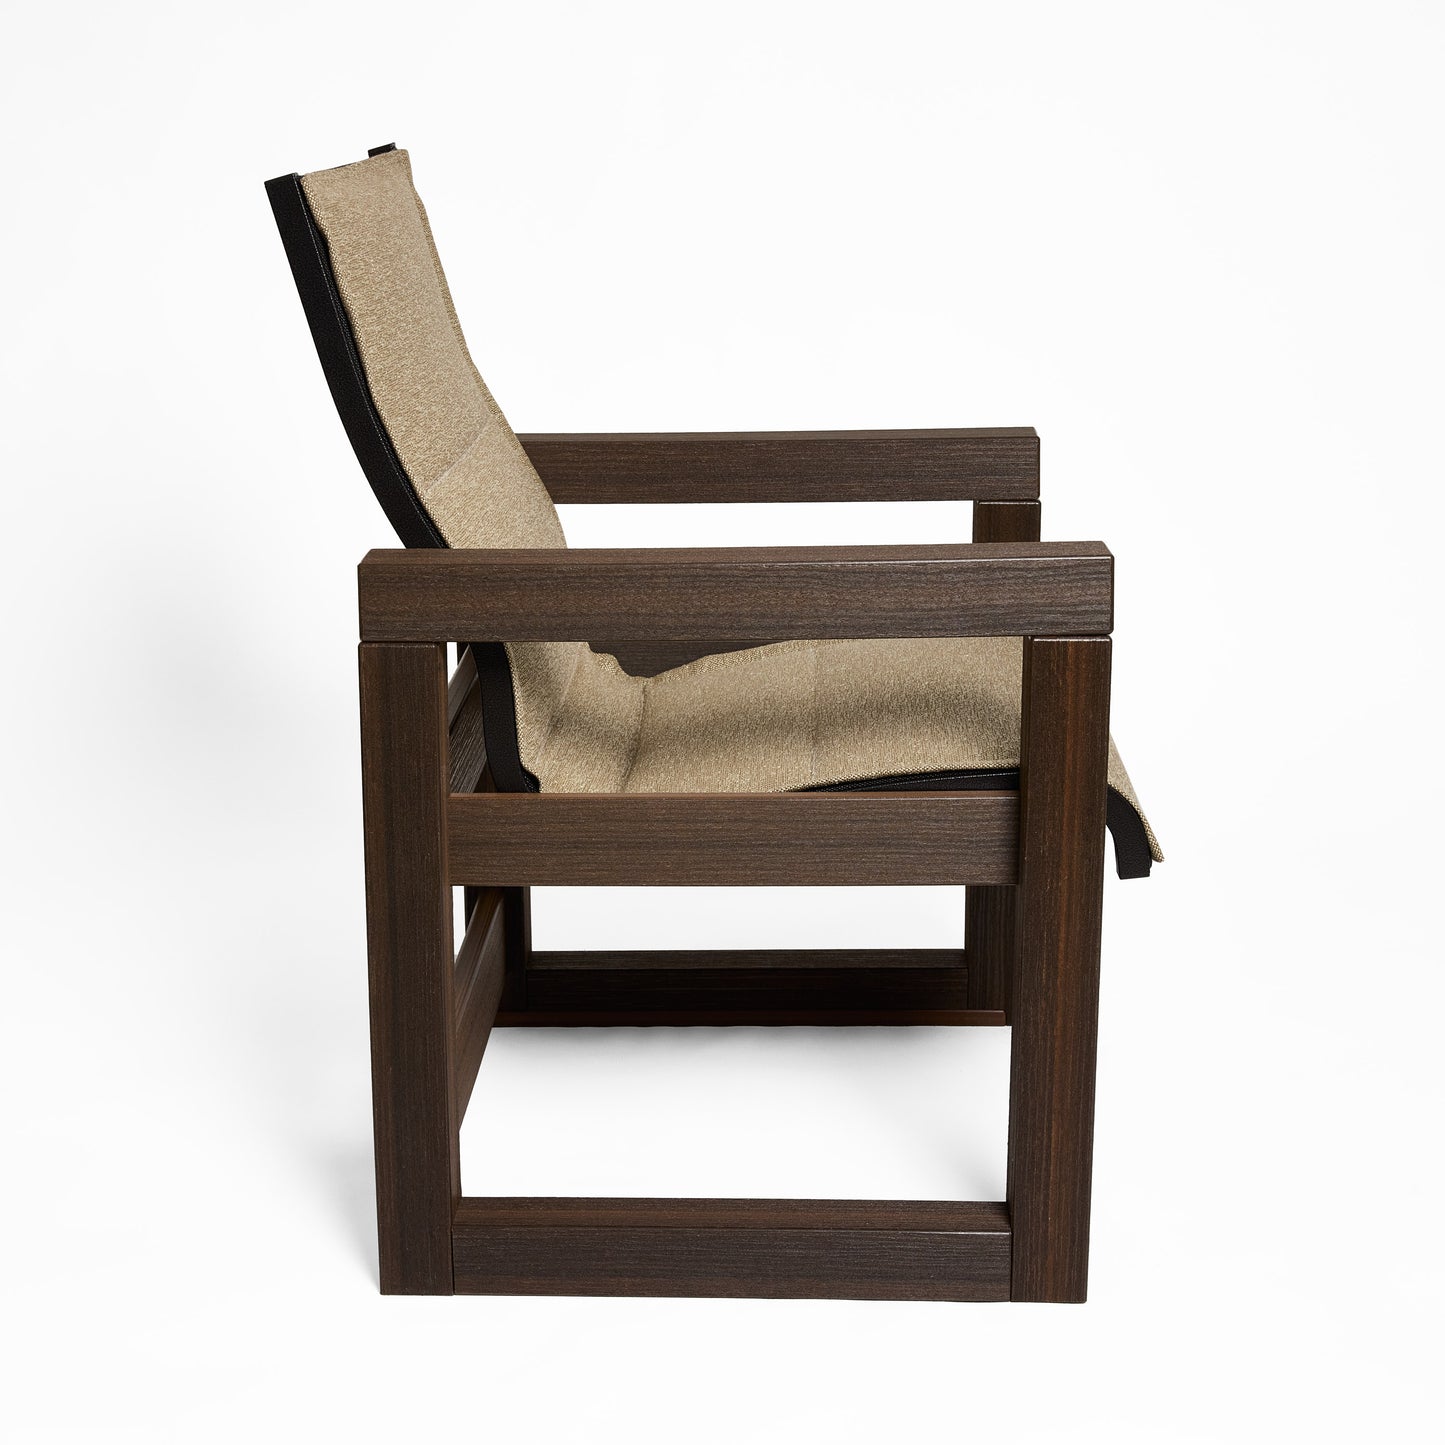 Frame Padded Sling Dining Chair